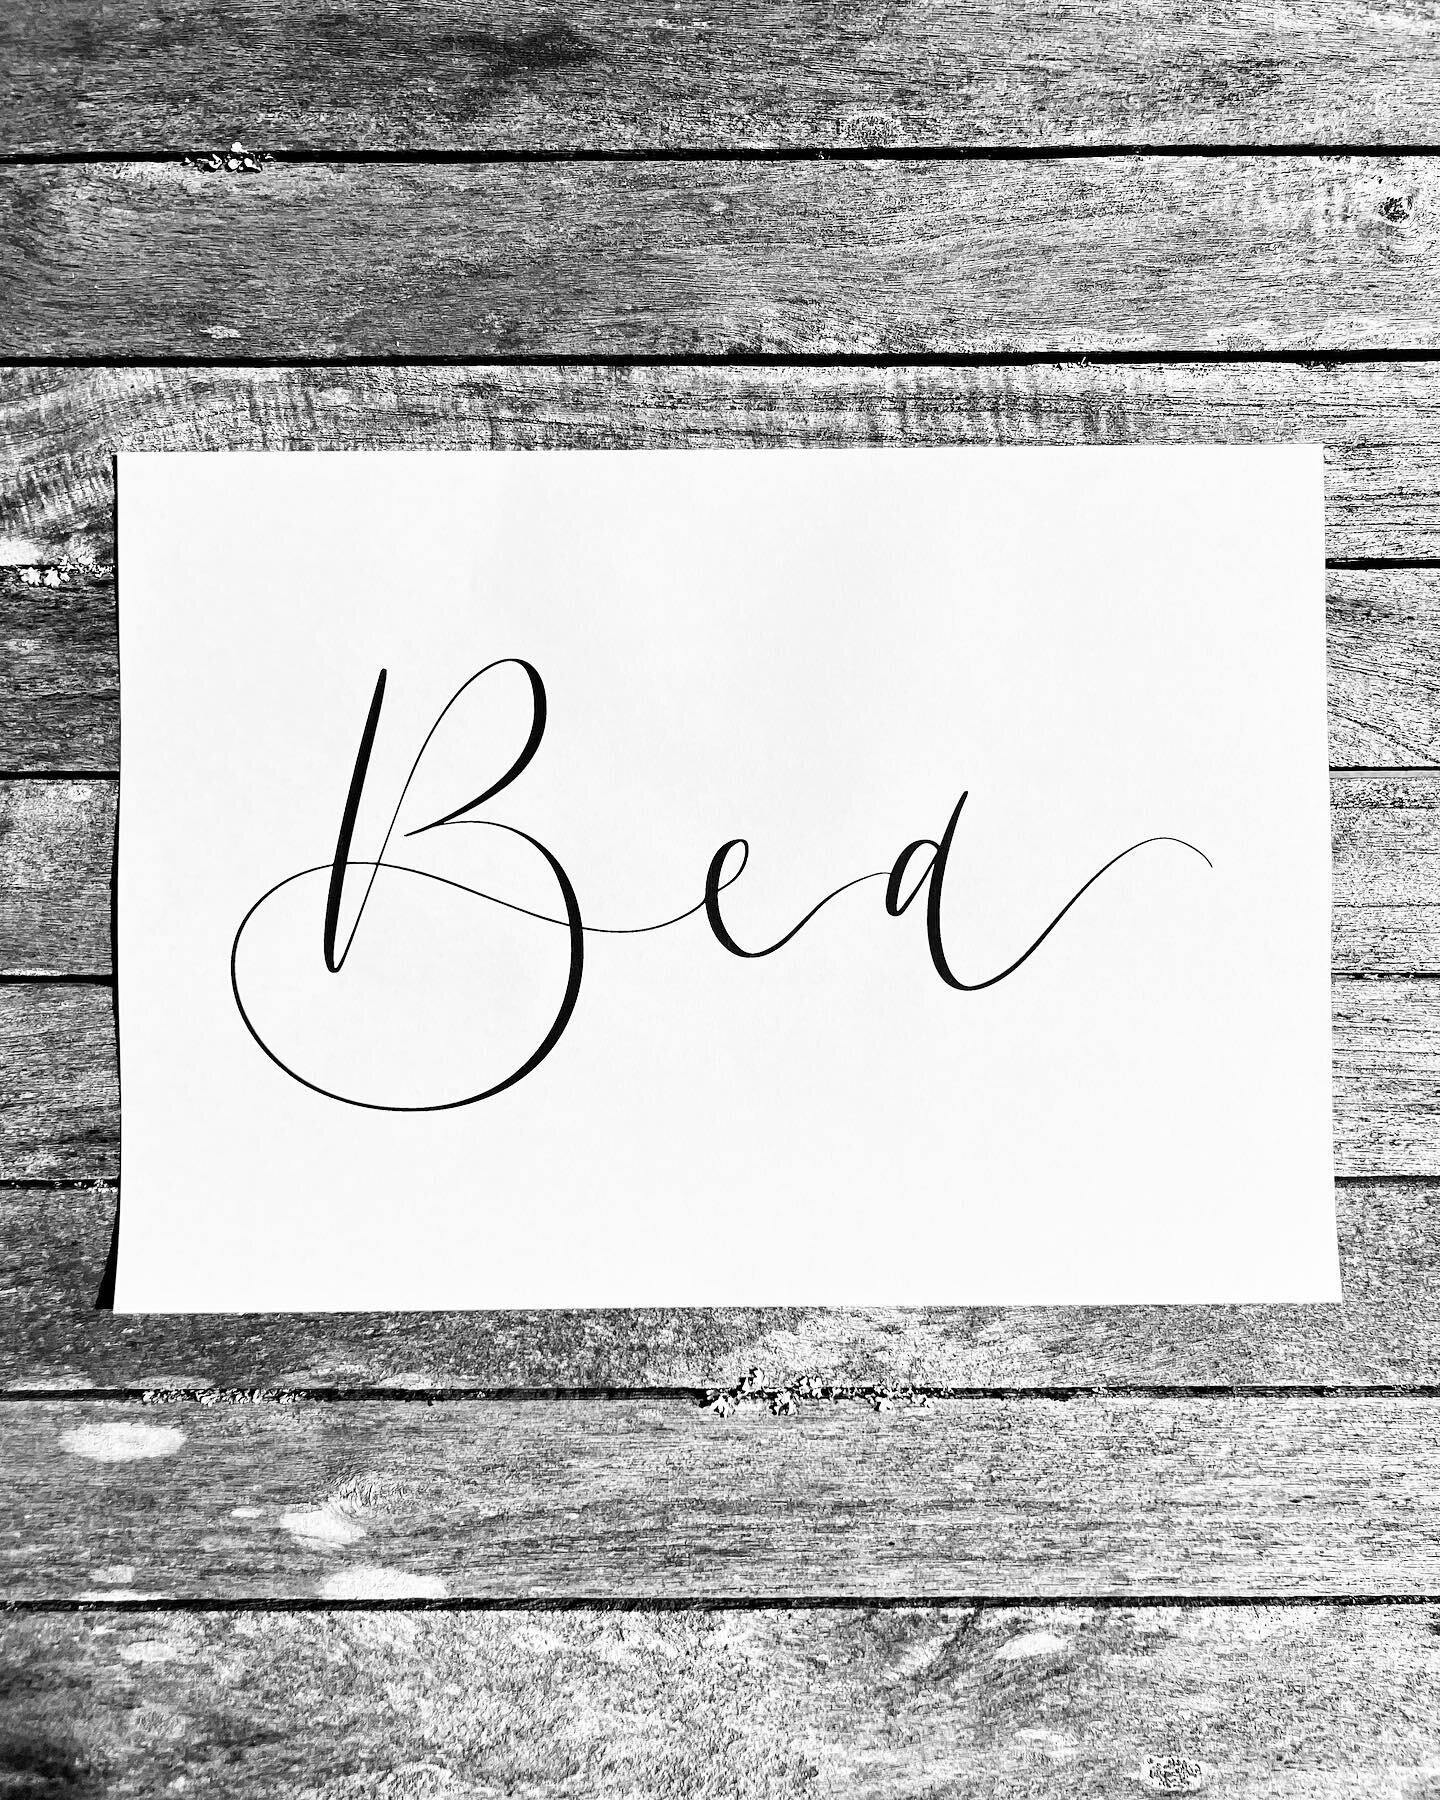 B E A 🐝 7.3.23
&bull;
One month of Bea, the reason for my silence on here over the past few weeks, and the only word I&rsquo;ve managed to write in calligraphy since signing off on maternity leave! 
&bull;
Looking forward to taking on more work in a